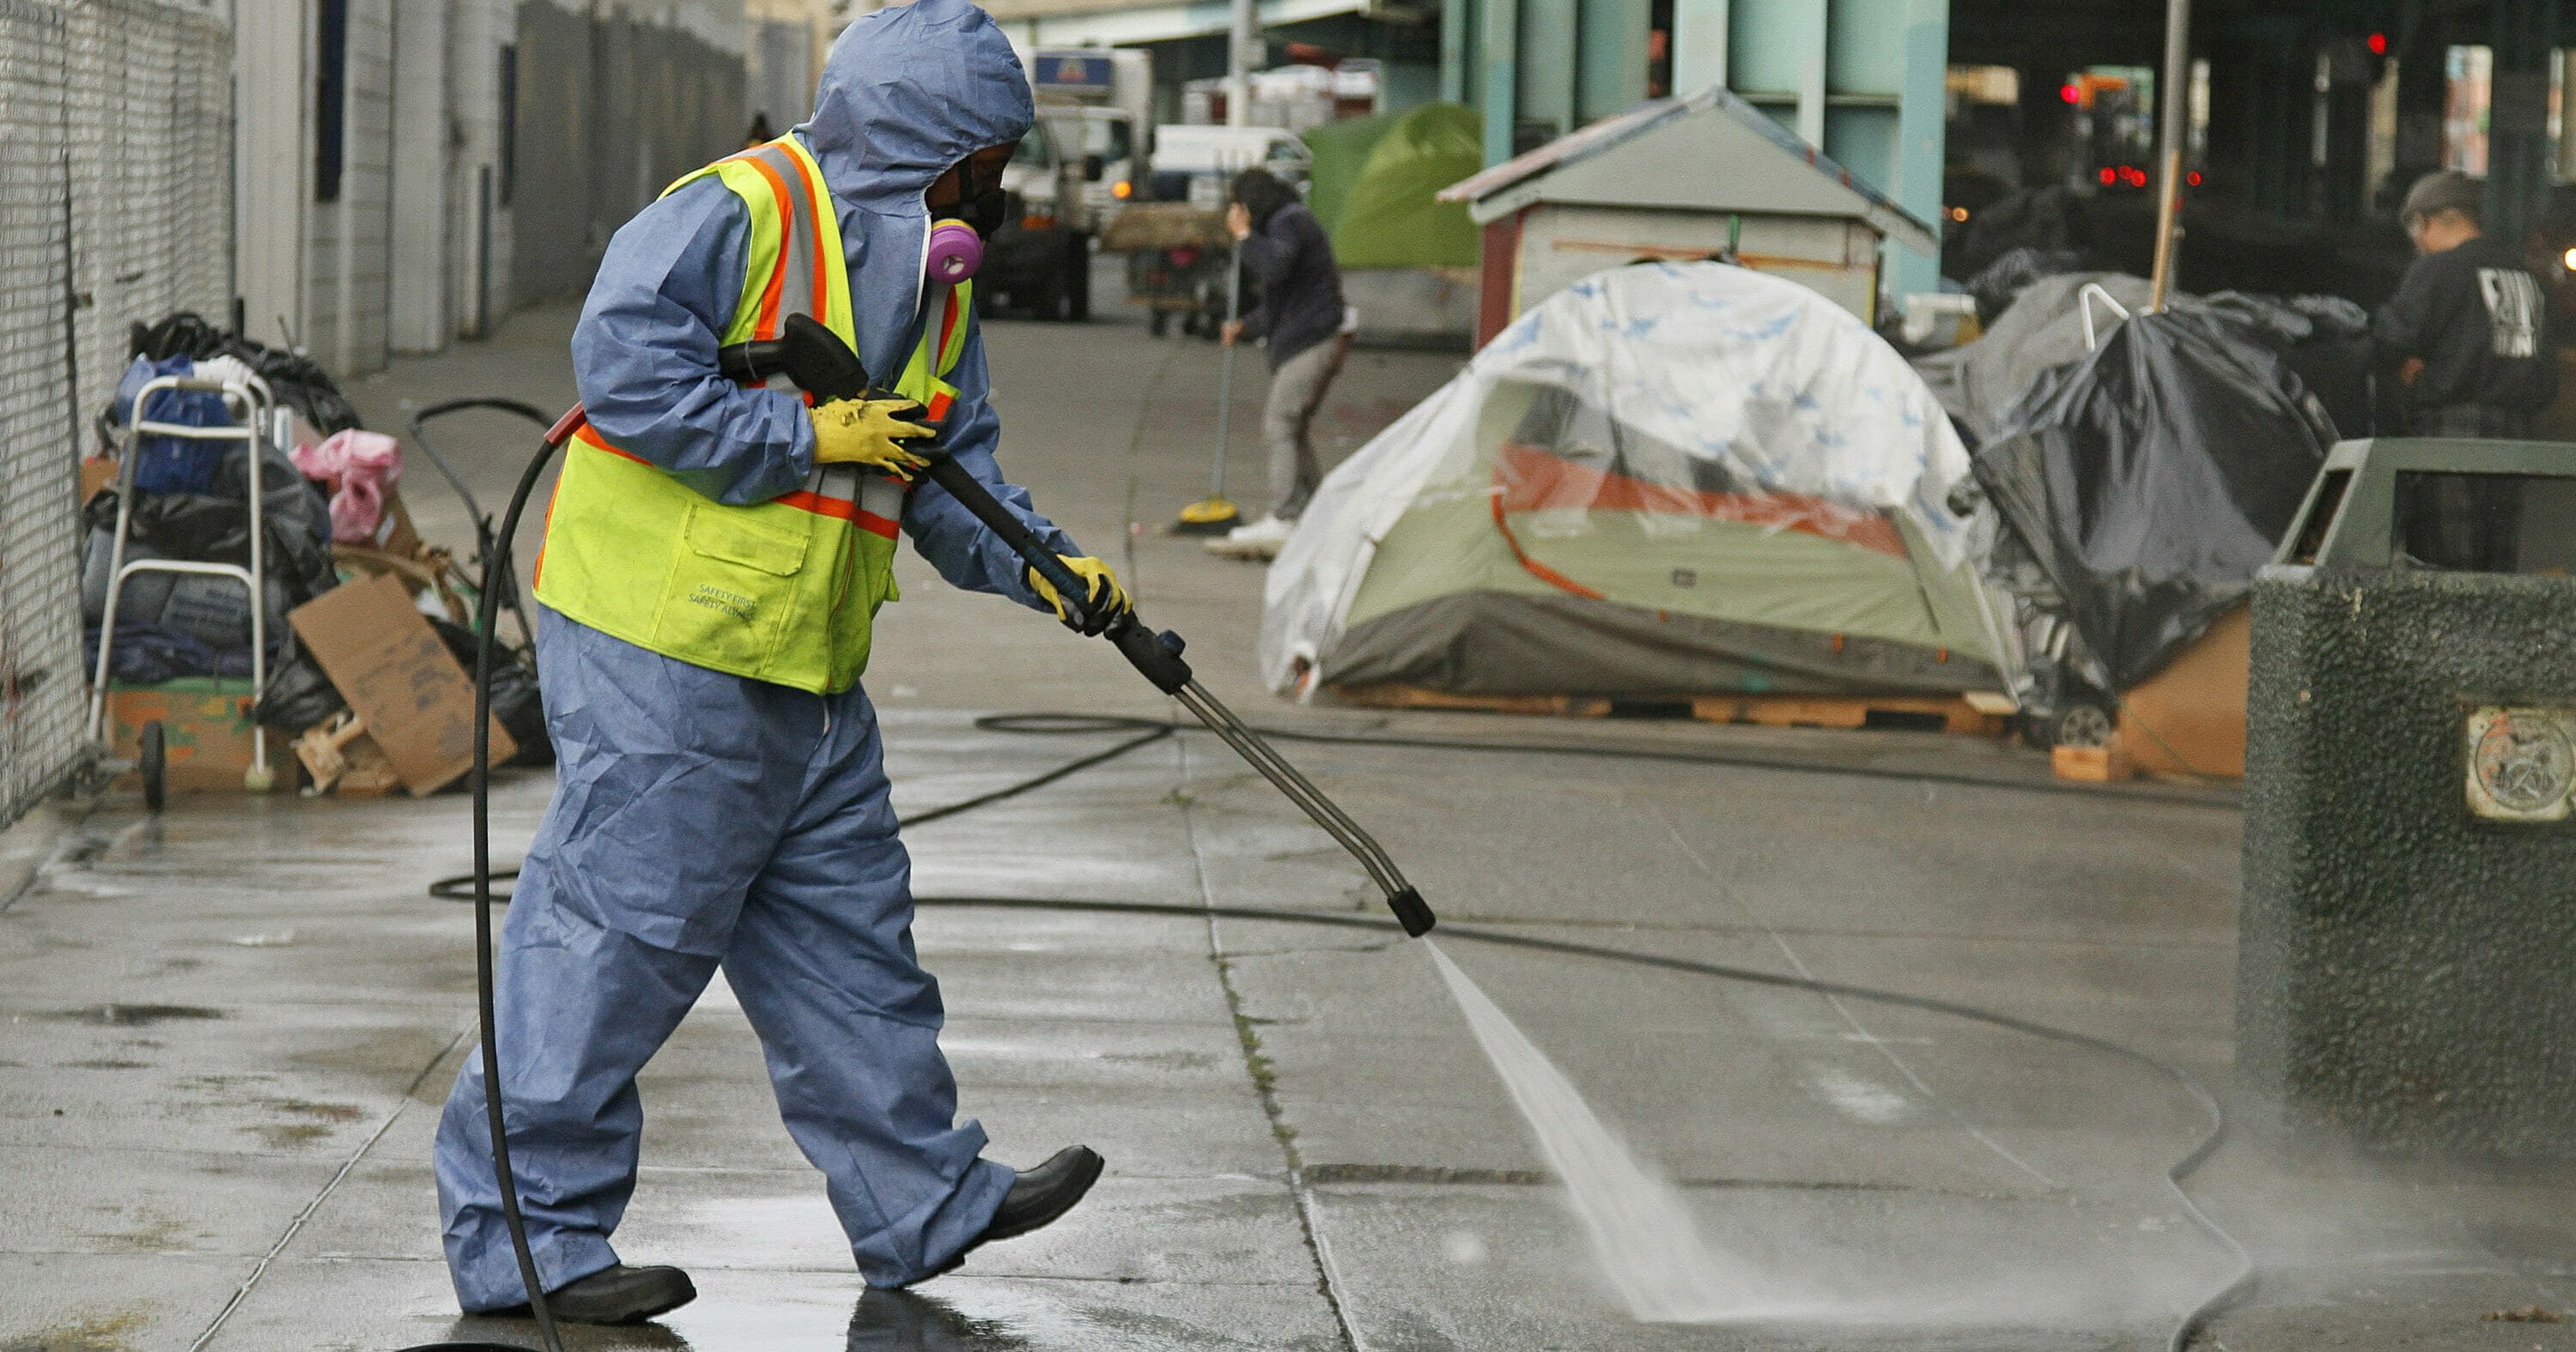 A city worker uses a power washer to clean the sidewalk by a tent city along Division Street in San Francisco on Feb. 26, 2016.